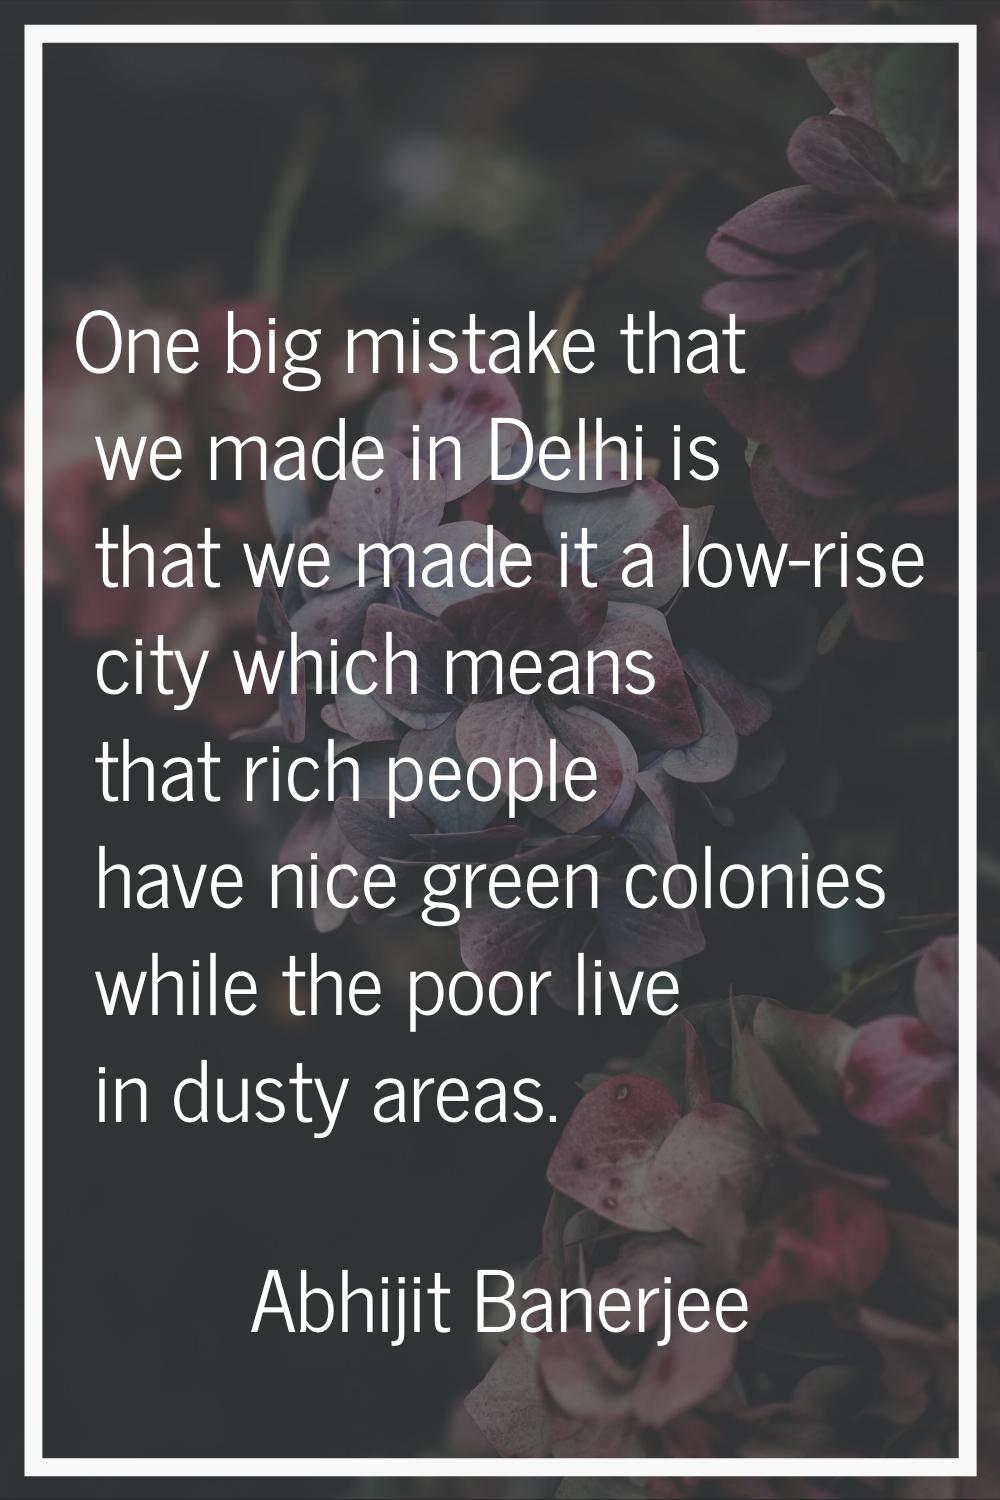 One big mistake that we made in Delhi is that we made it a low-rise city which means that rich peop